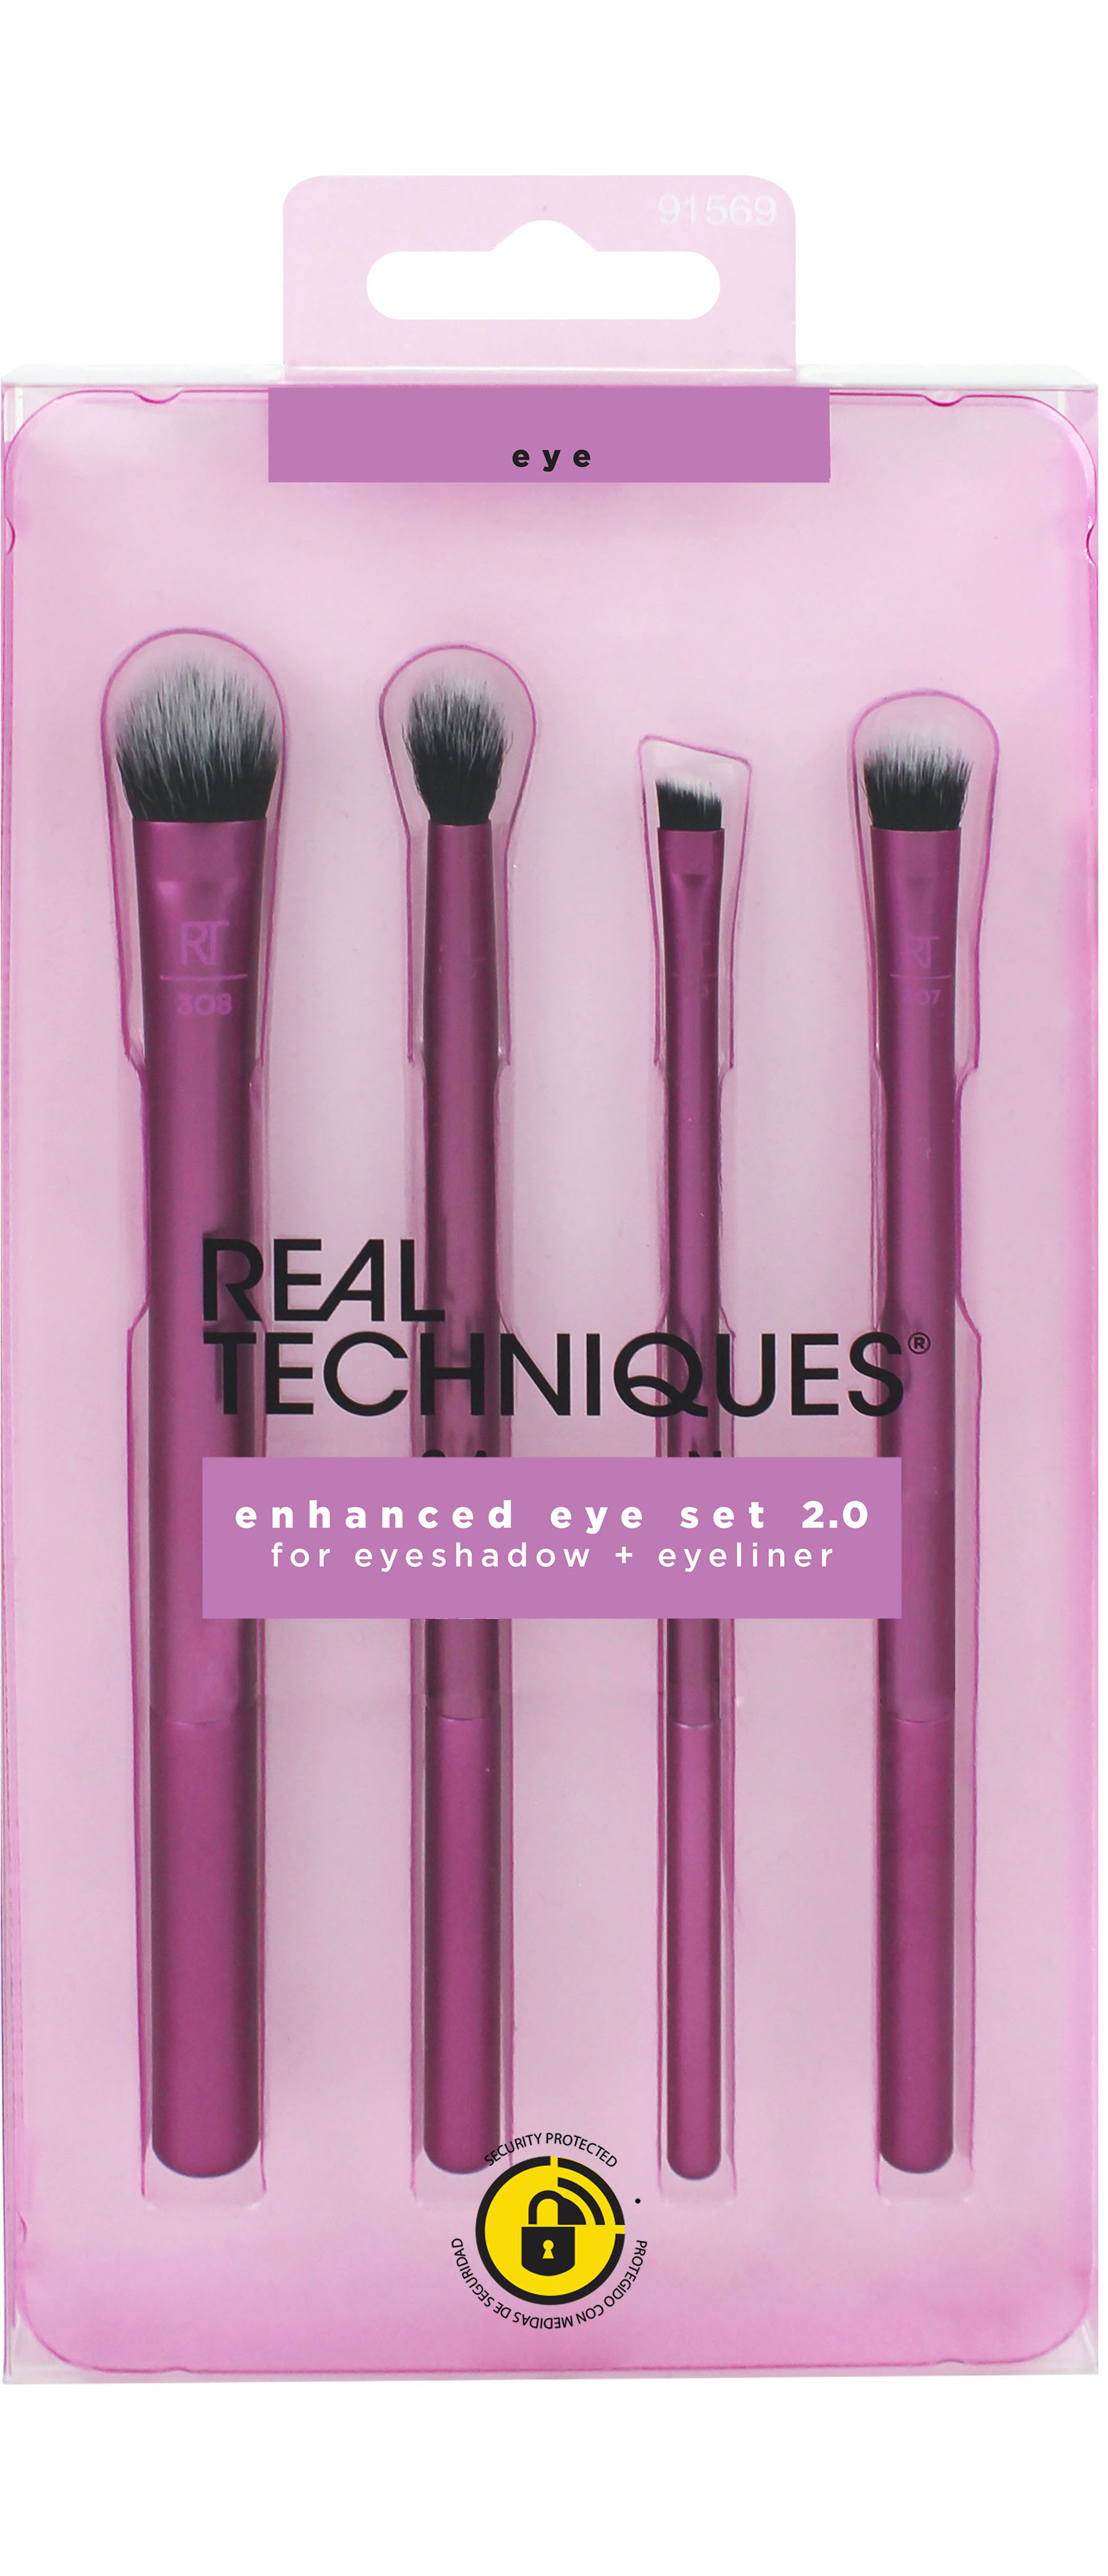 Real Techniques Enhanced Eye Makeup Brush Set, 4 Pieces - image 1 of 6